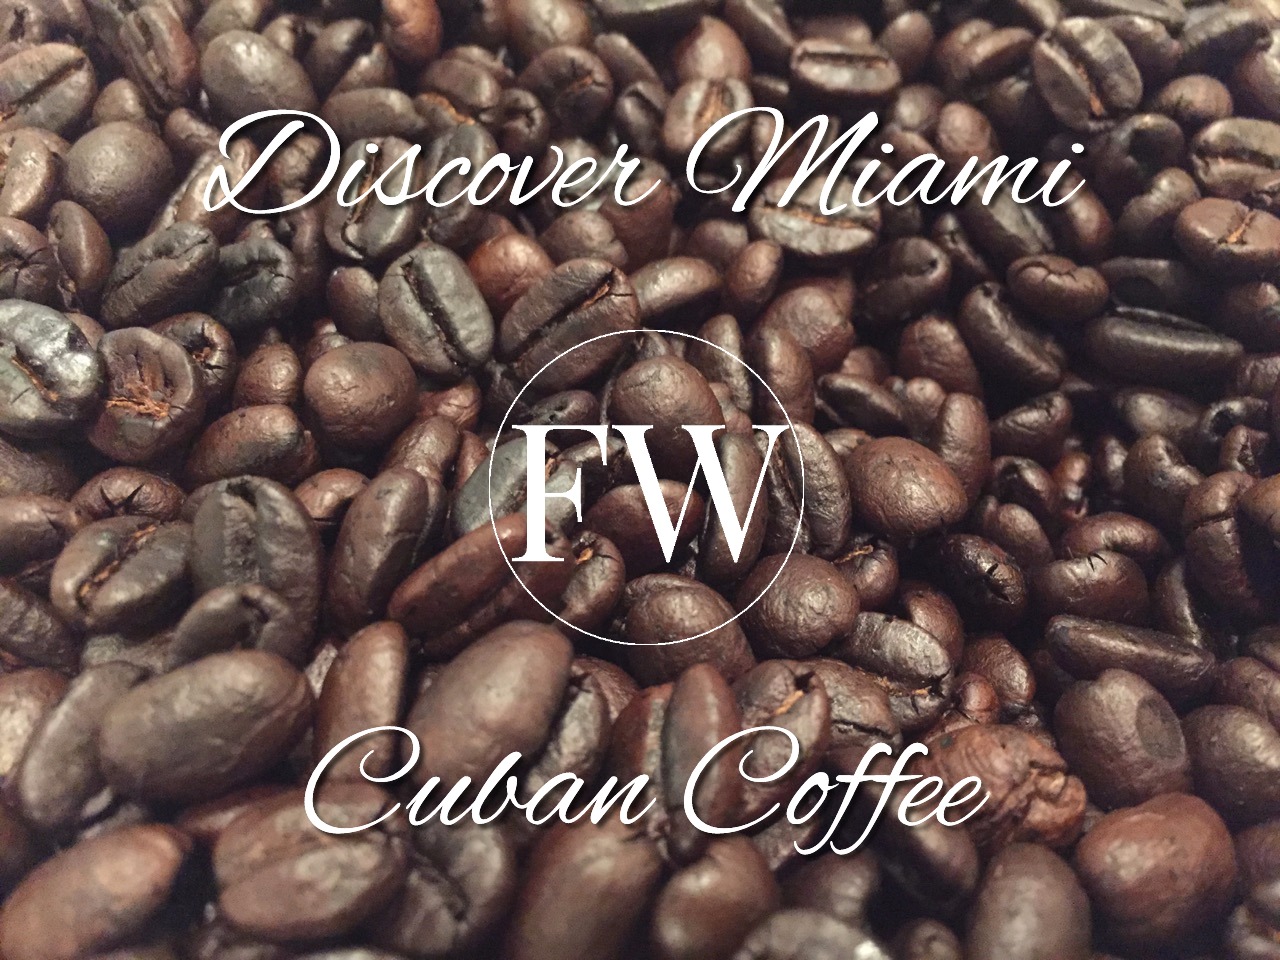 Cuban coffee, what it is and where to find it in Miami